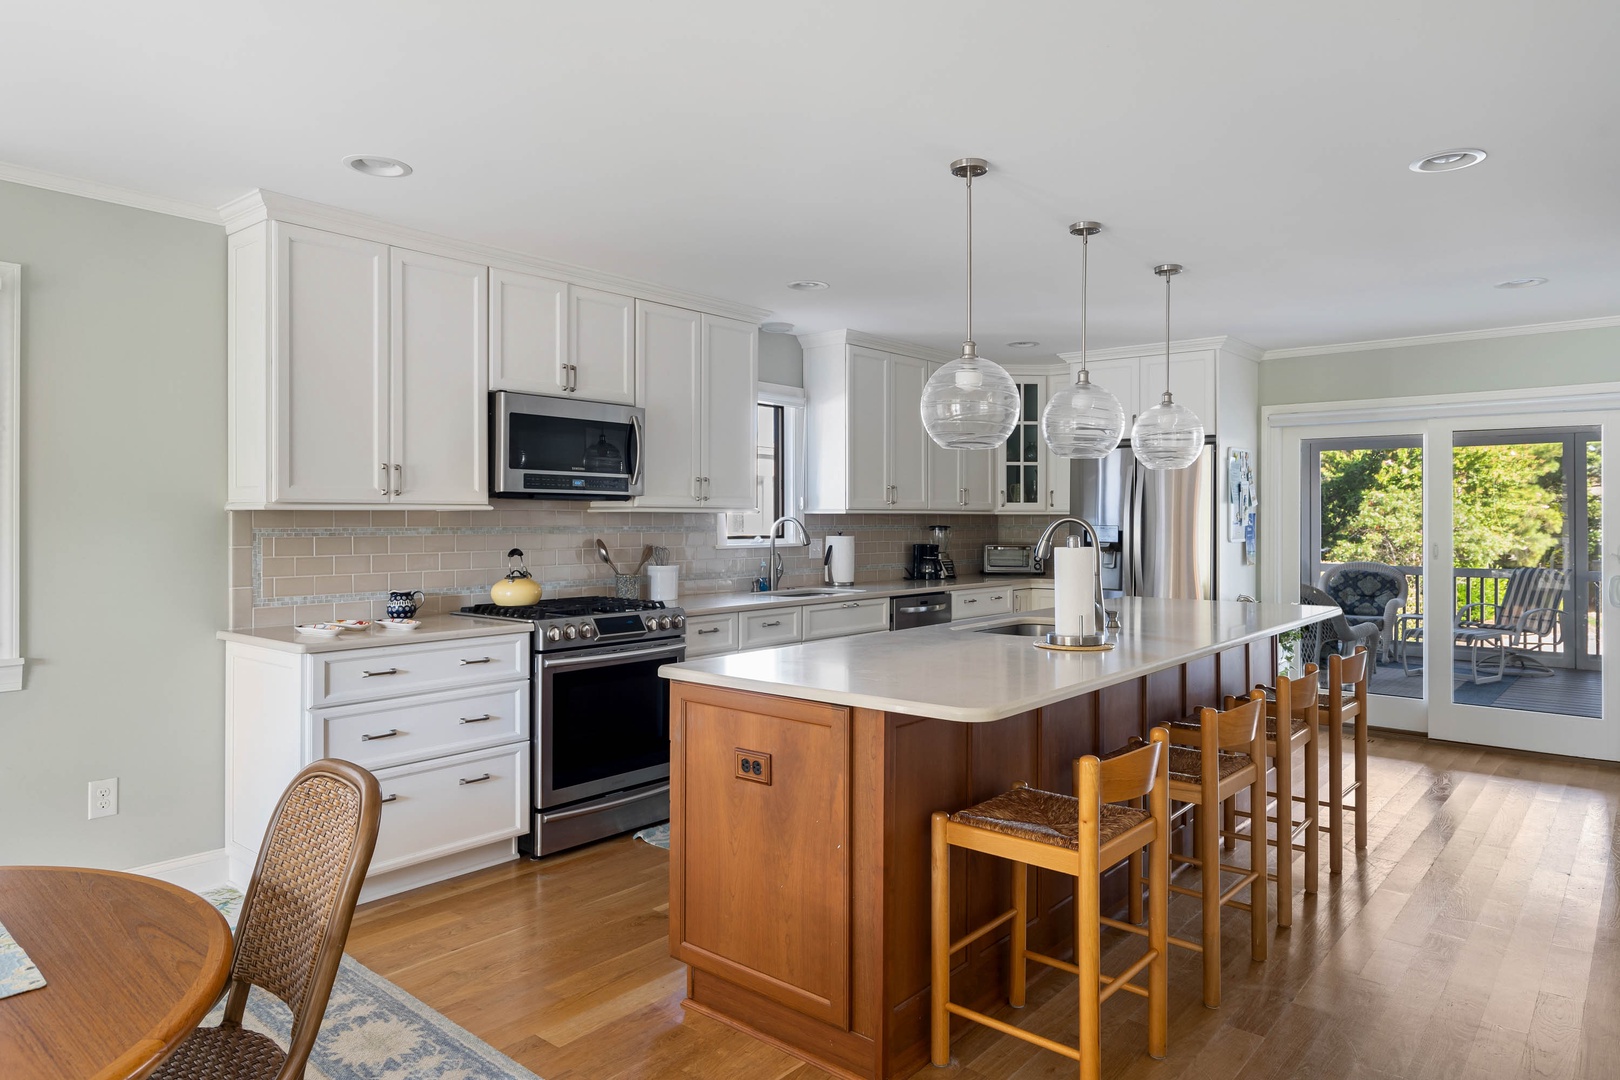 A gorgeous, open kitchen with beautiful amenities, ample storage, and counter seating for 4